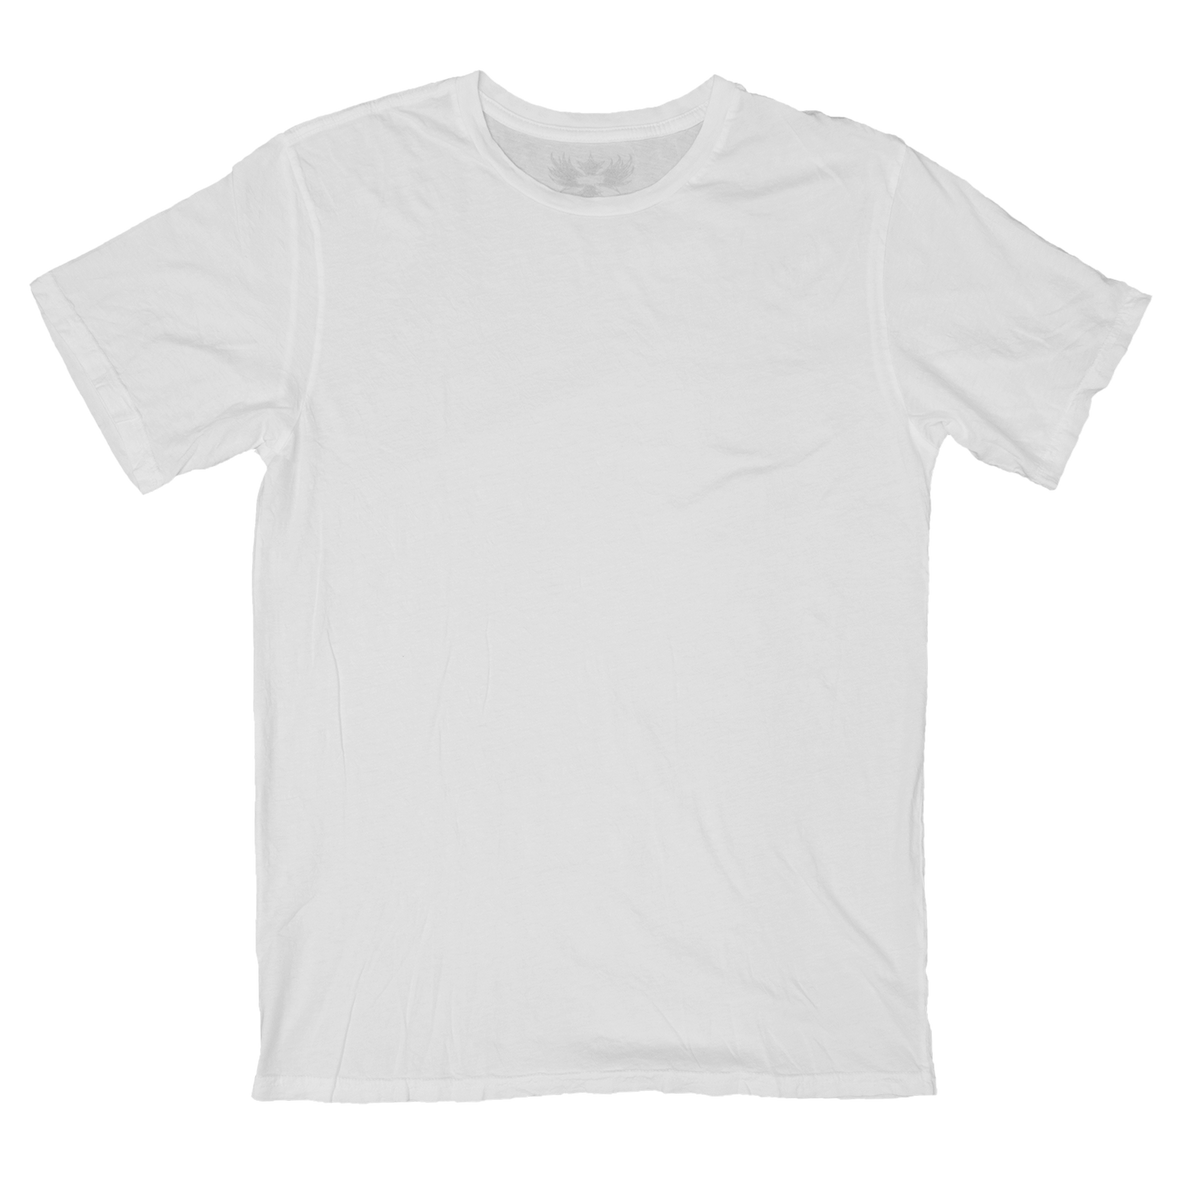 White Crew Neck T-Shirt | Plain Shirts For Men | Wicked Quick